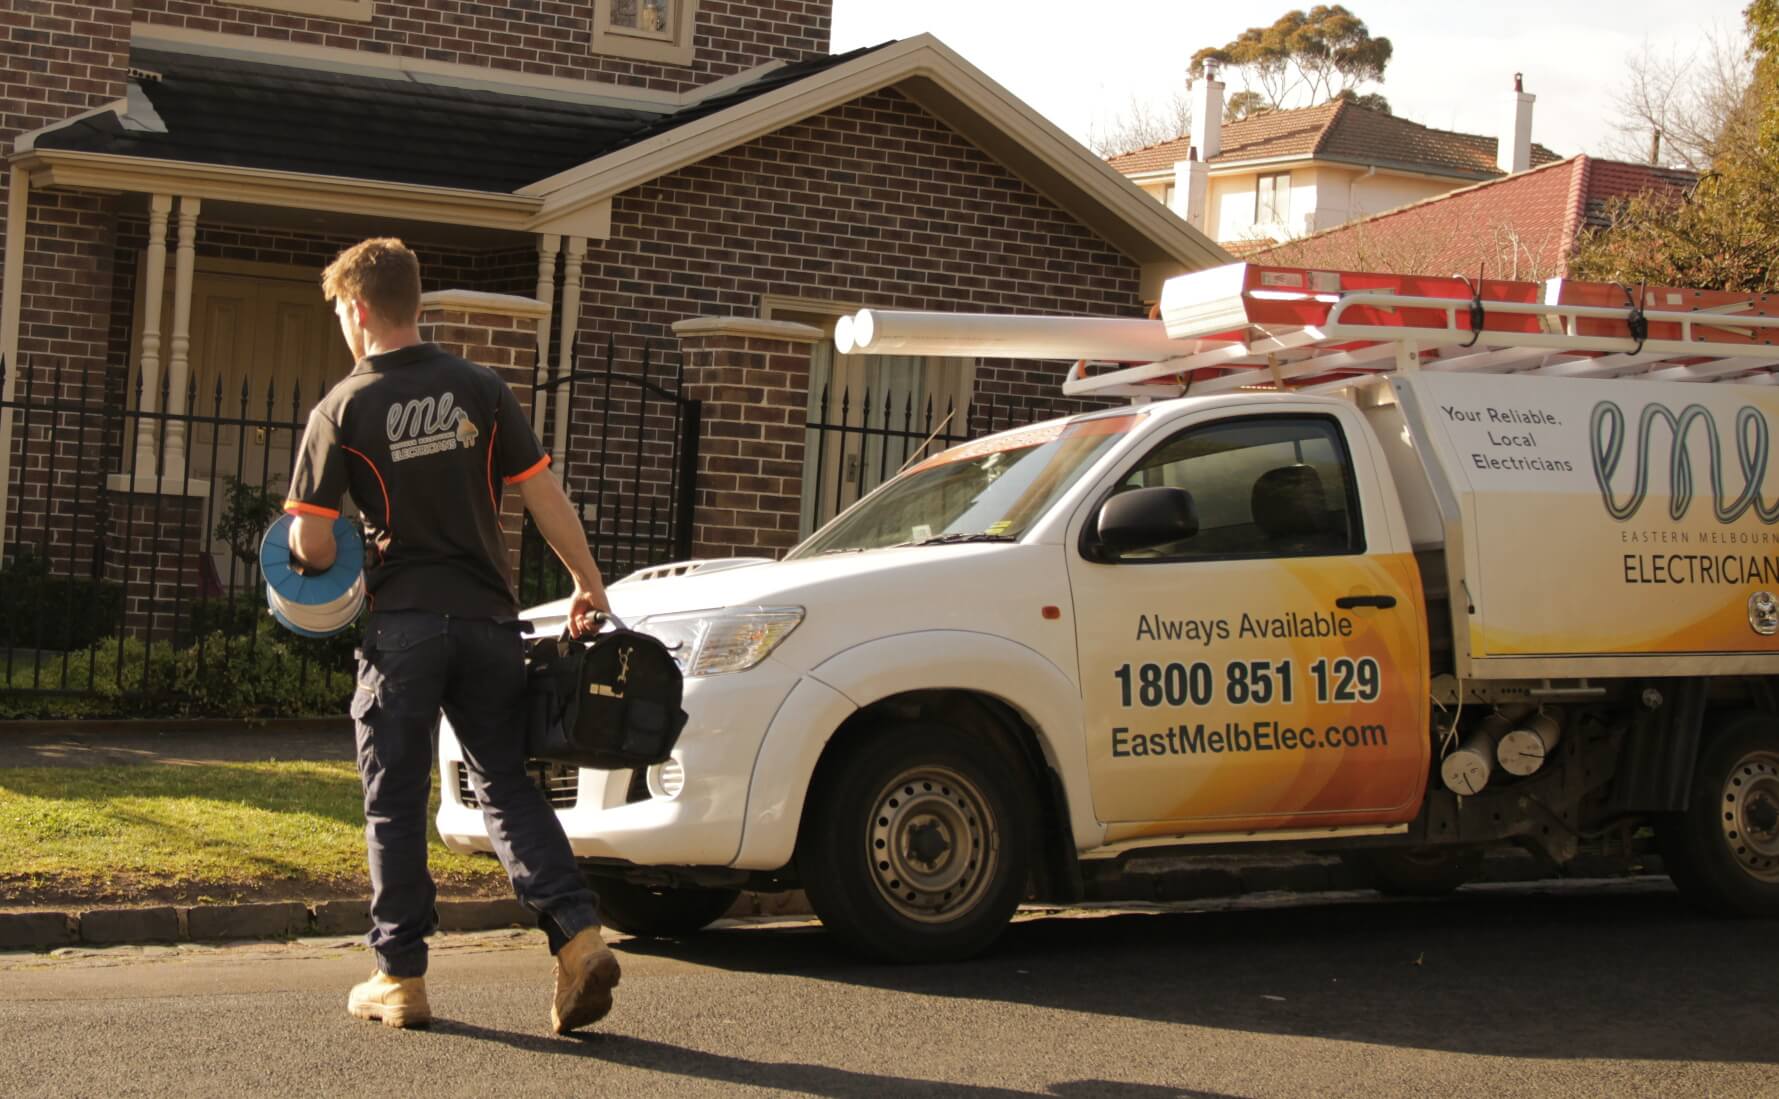 Contact Us - Eastern Melbourne Electricians